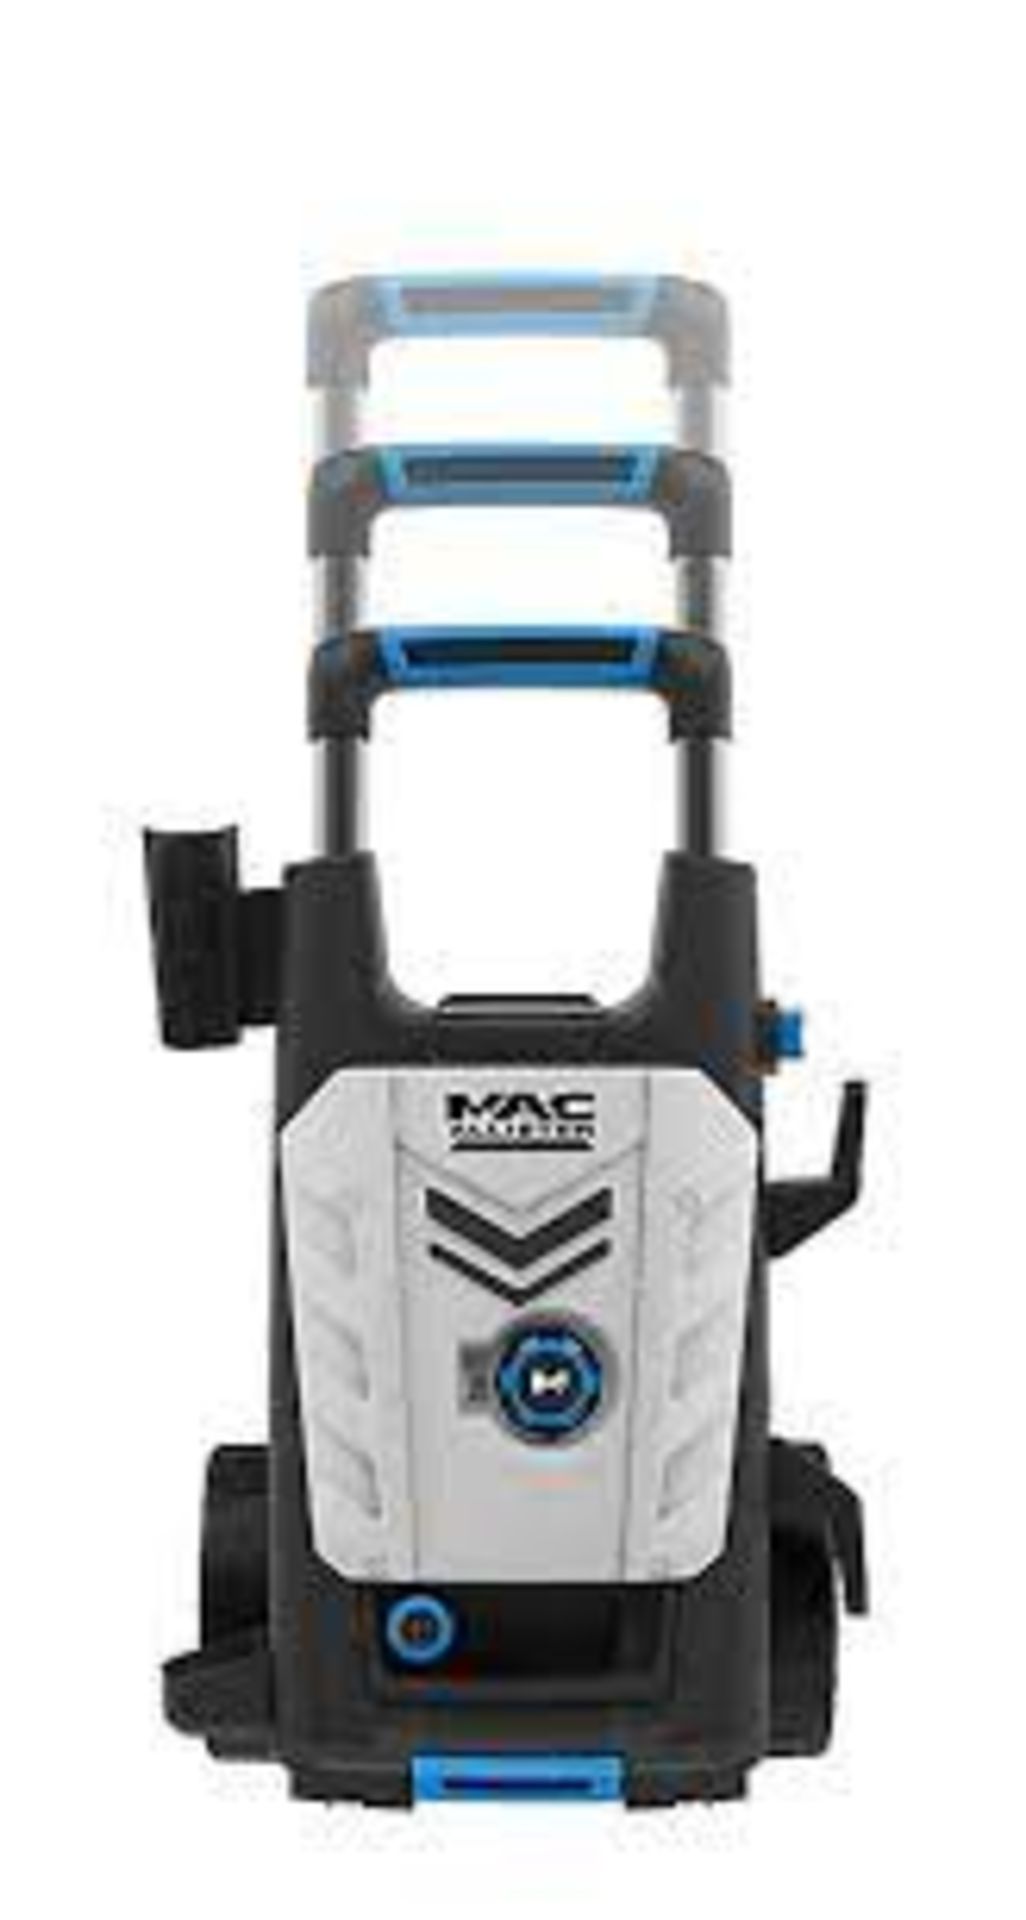 Mac Allister Corded Pressure Washer 1.8kW. -ER51. This 1800w compact pressure washer is ideal for